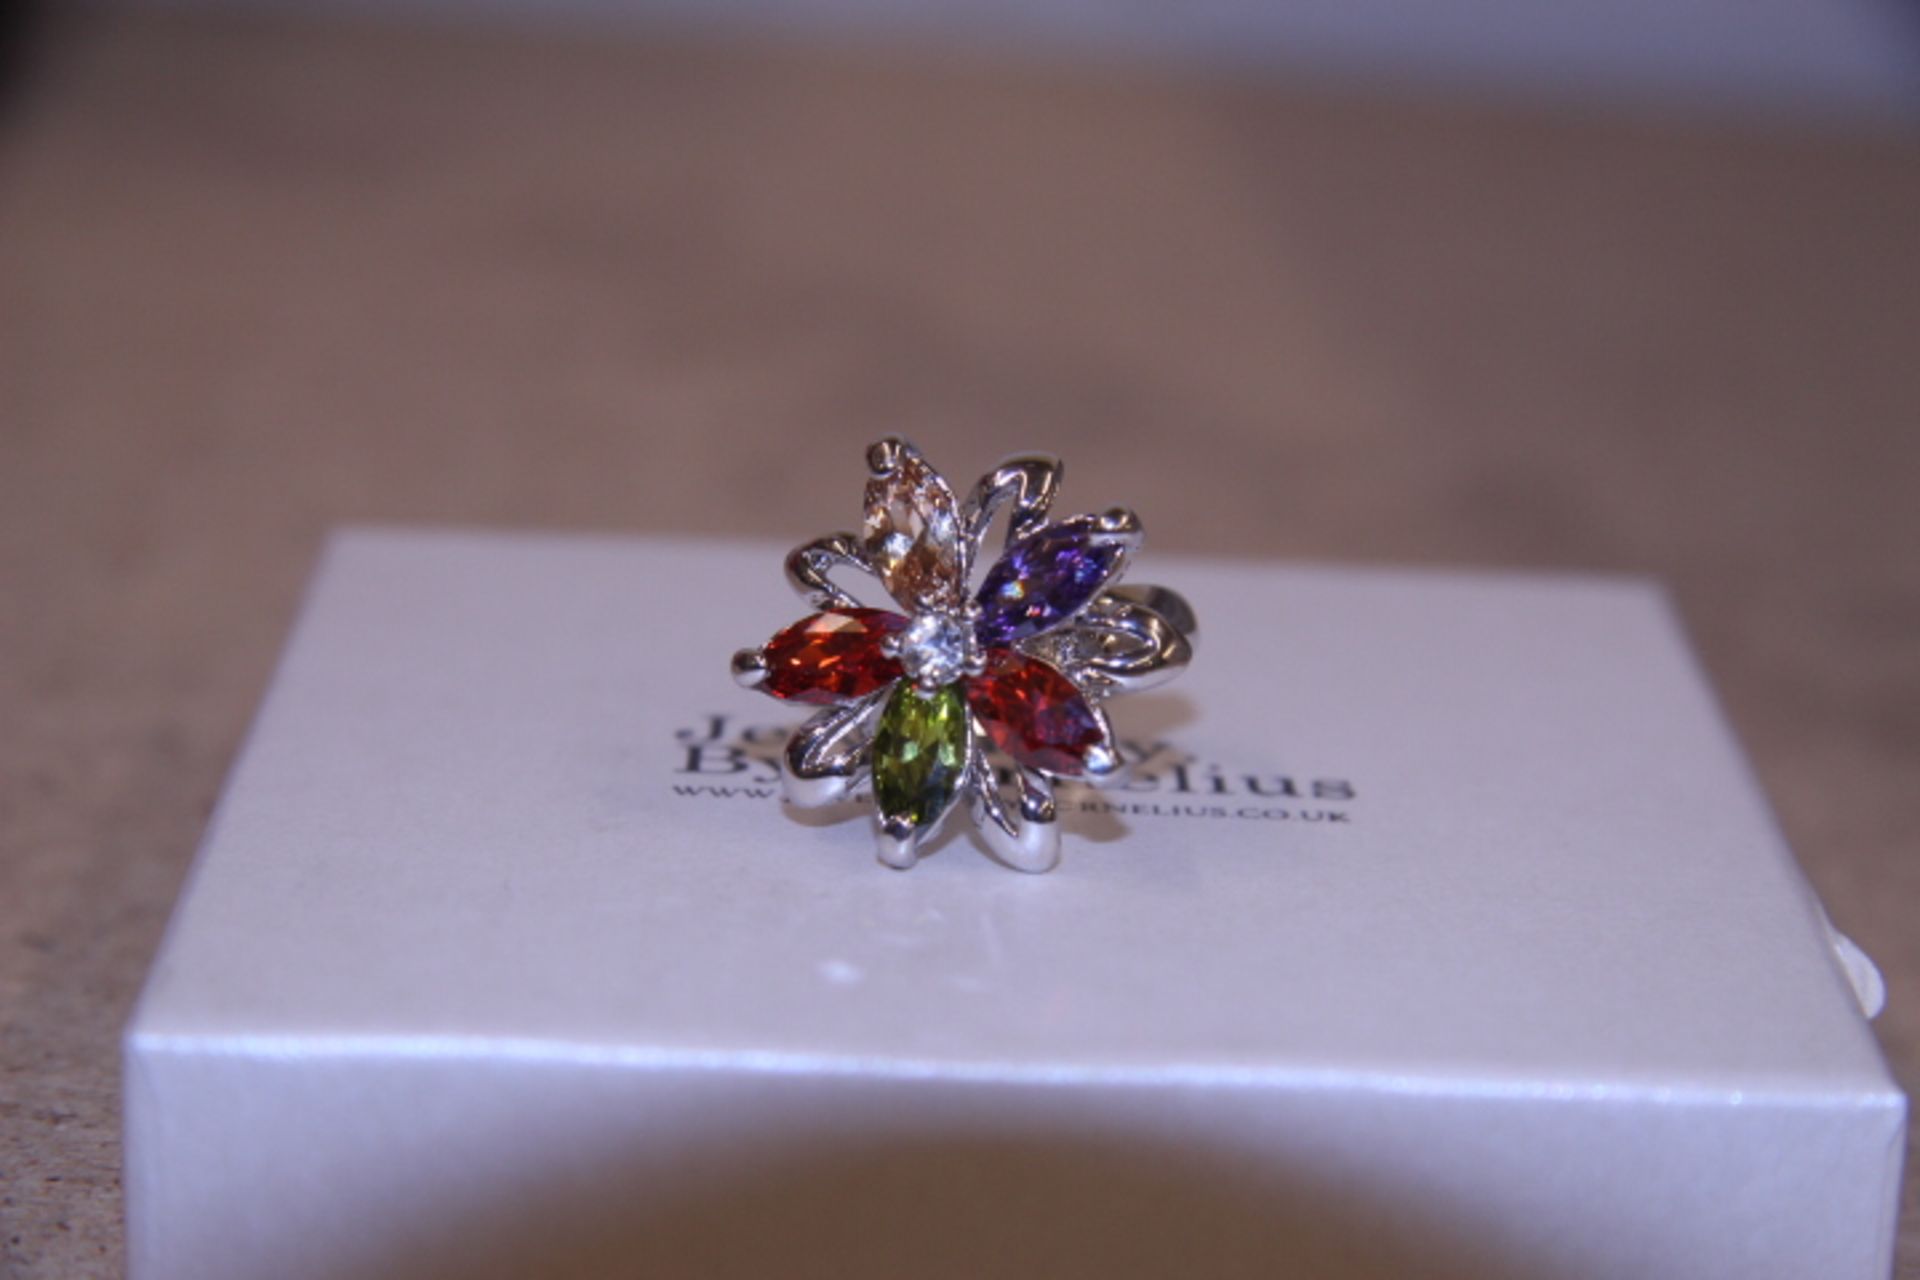 V Brand New Platinum Plated Multi Stone Flower Shape Ring X 2 YOUR BID PRICE TO BE MULTIPLIED BY